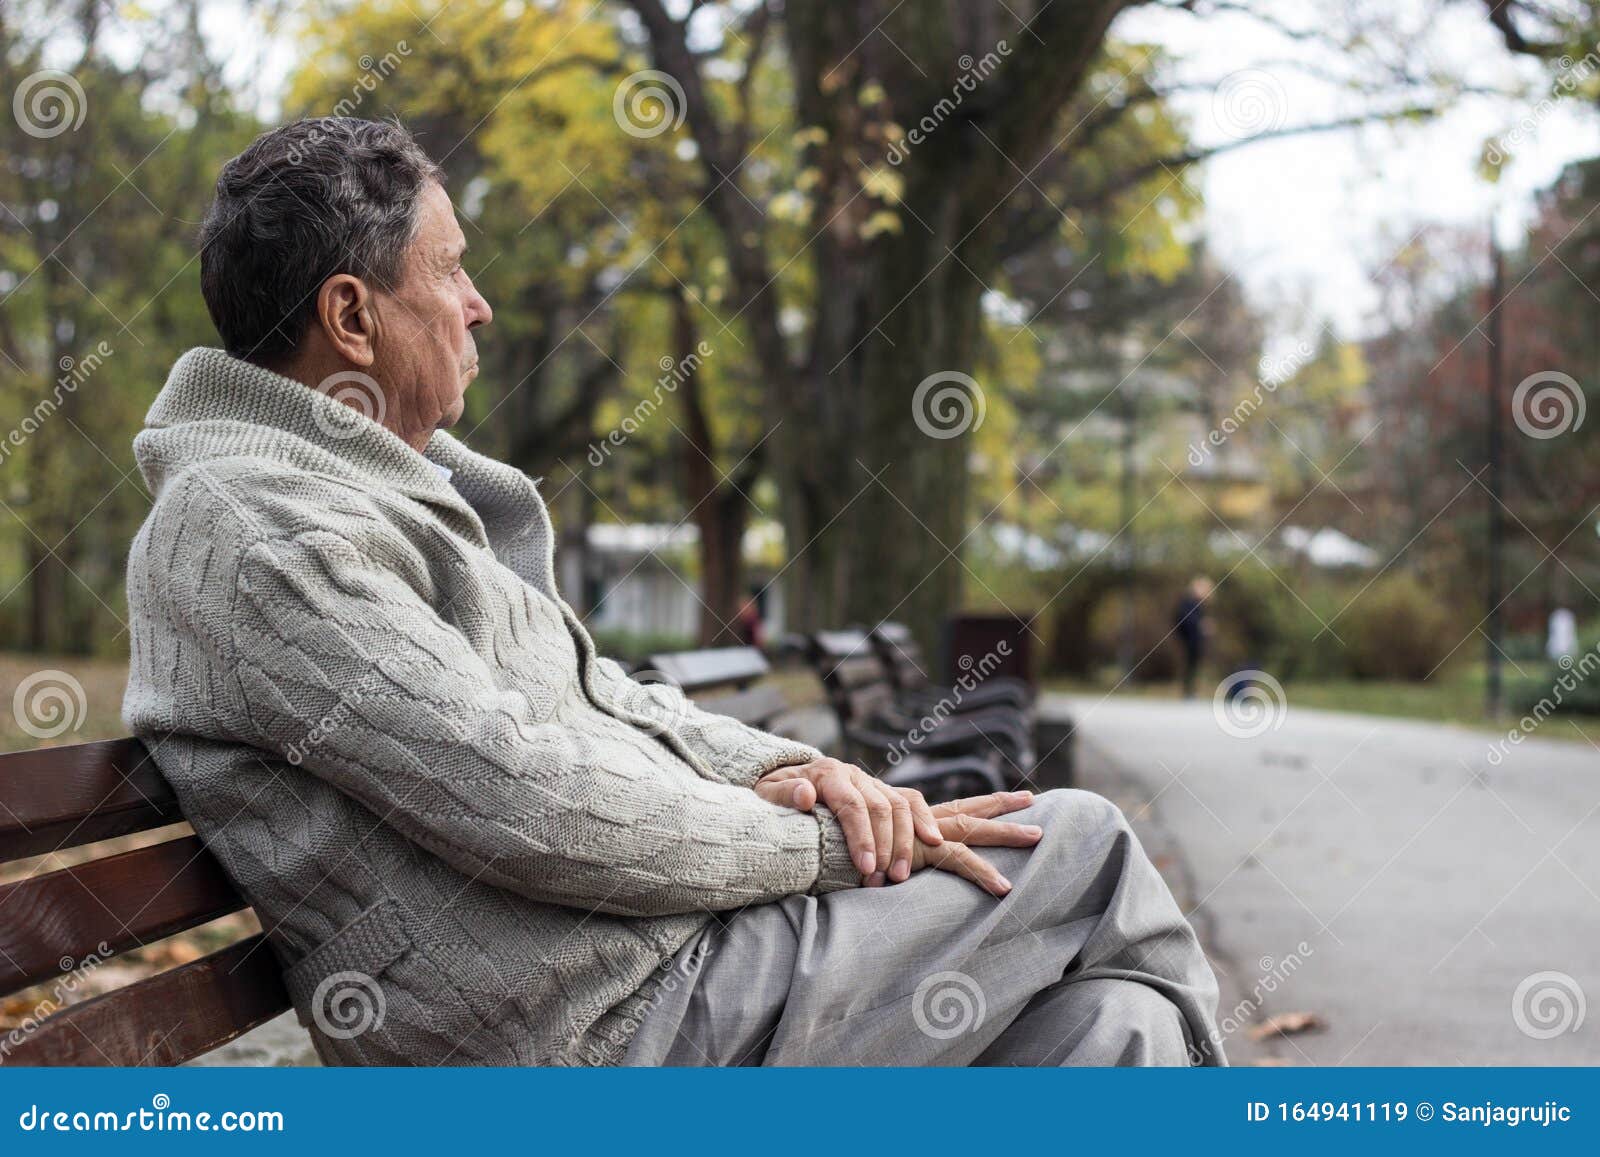 Senior Man Sitting on Bench in the Park Stock Image - Image of looking ...